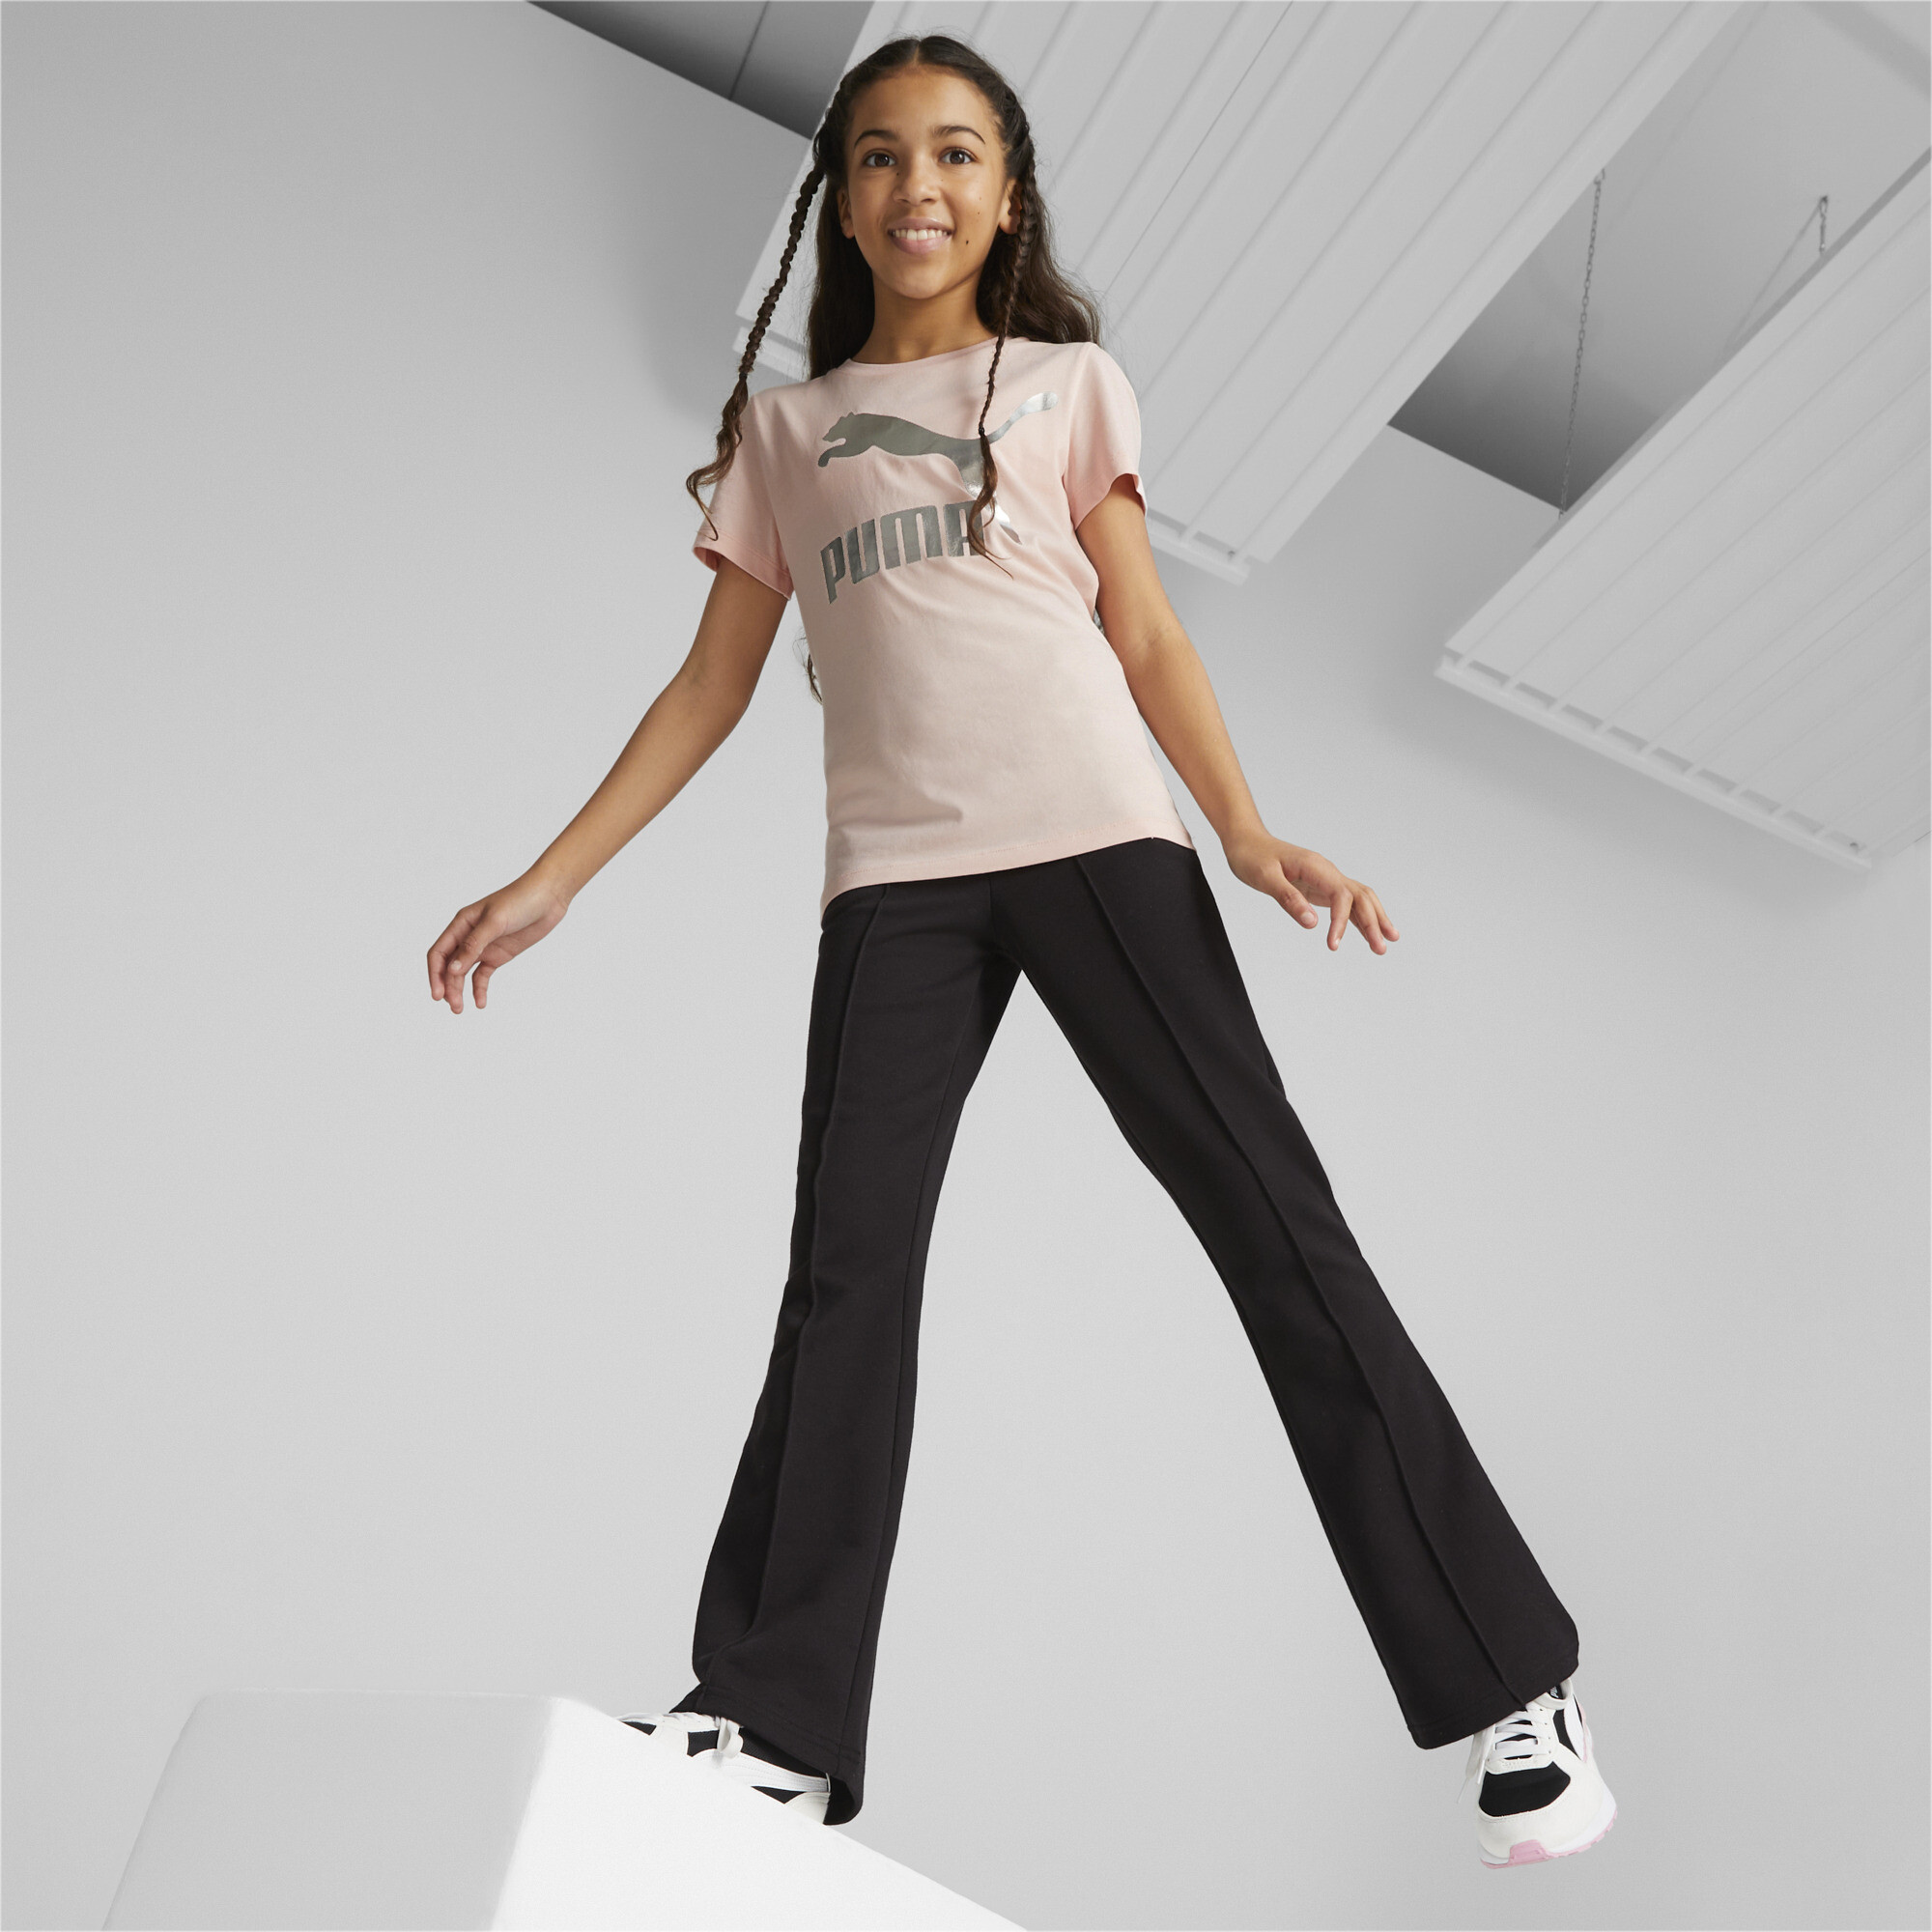 PUMA Classics Logo T-Shirt In Pink, Size 7-8 Youth